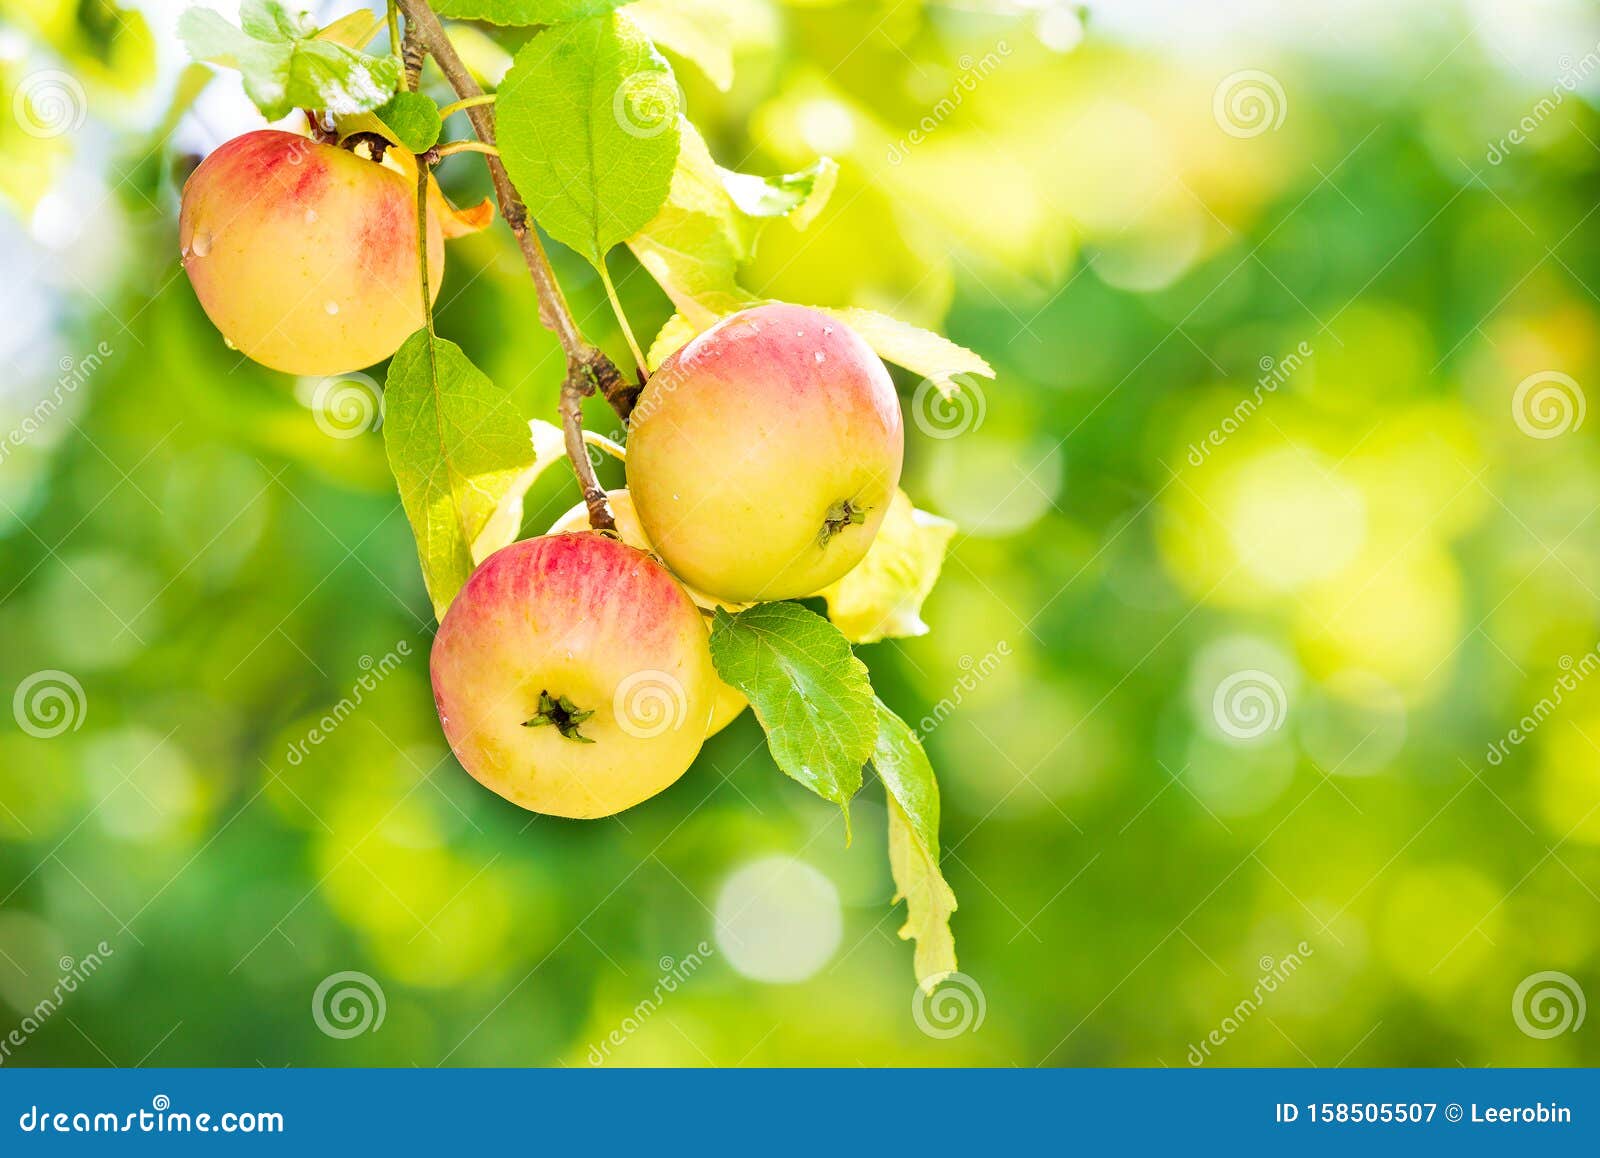 delicious apples ripening on tree branch